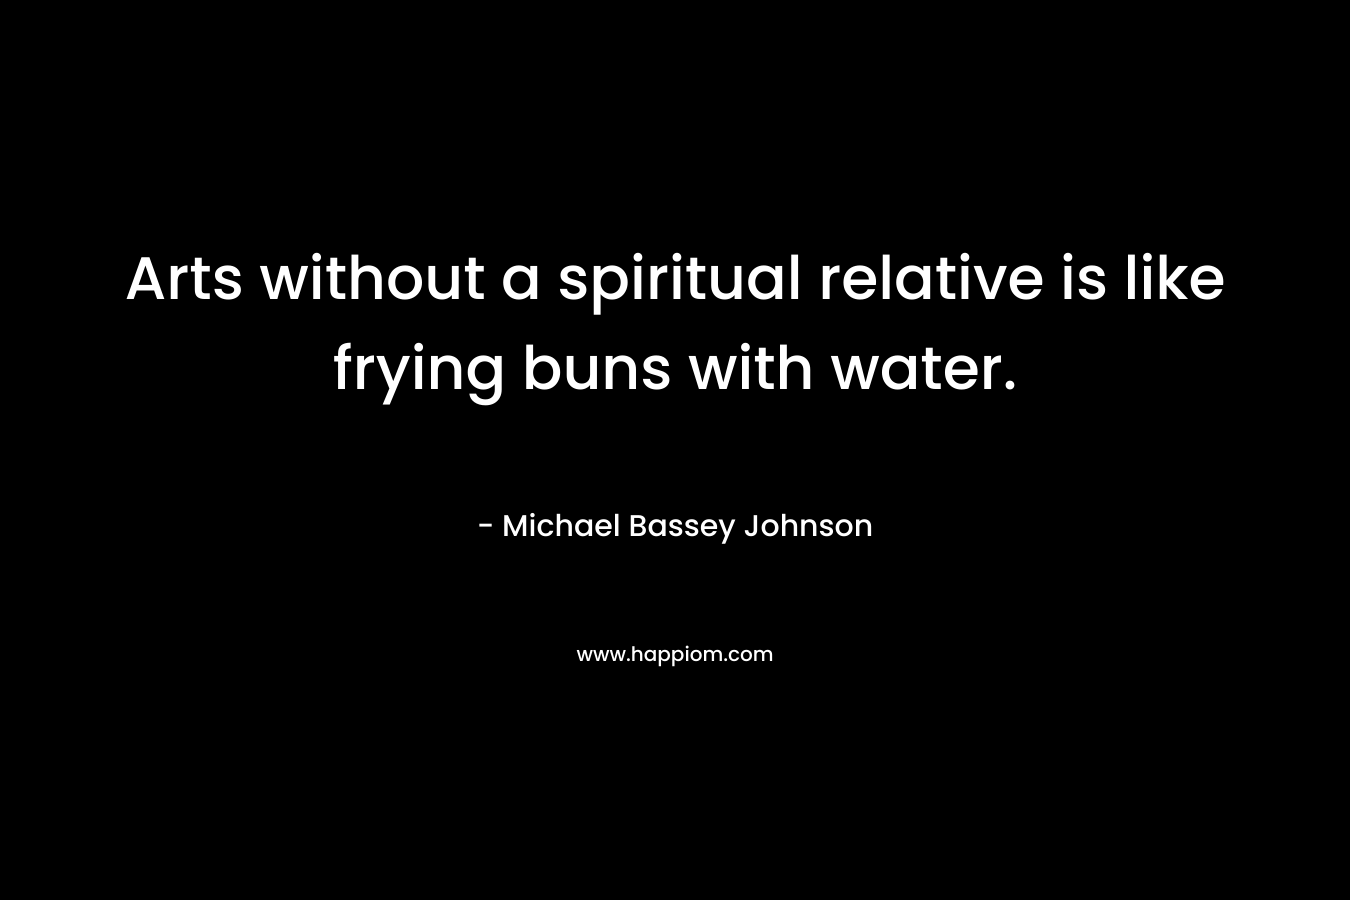 Arts without a spiritual relative is like frying buns with water.